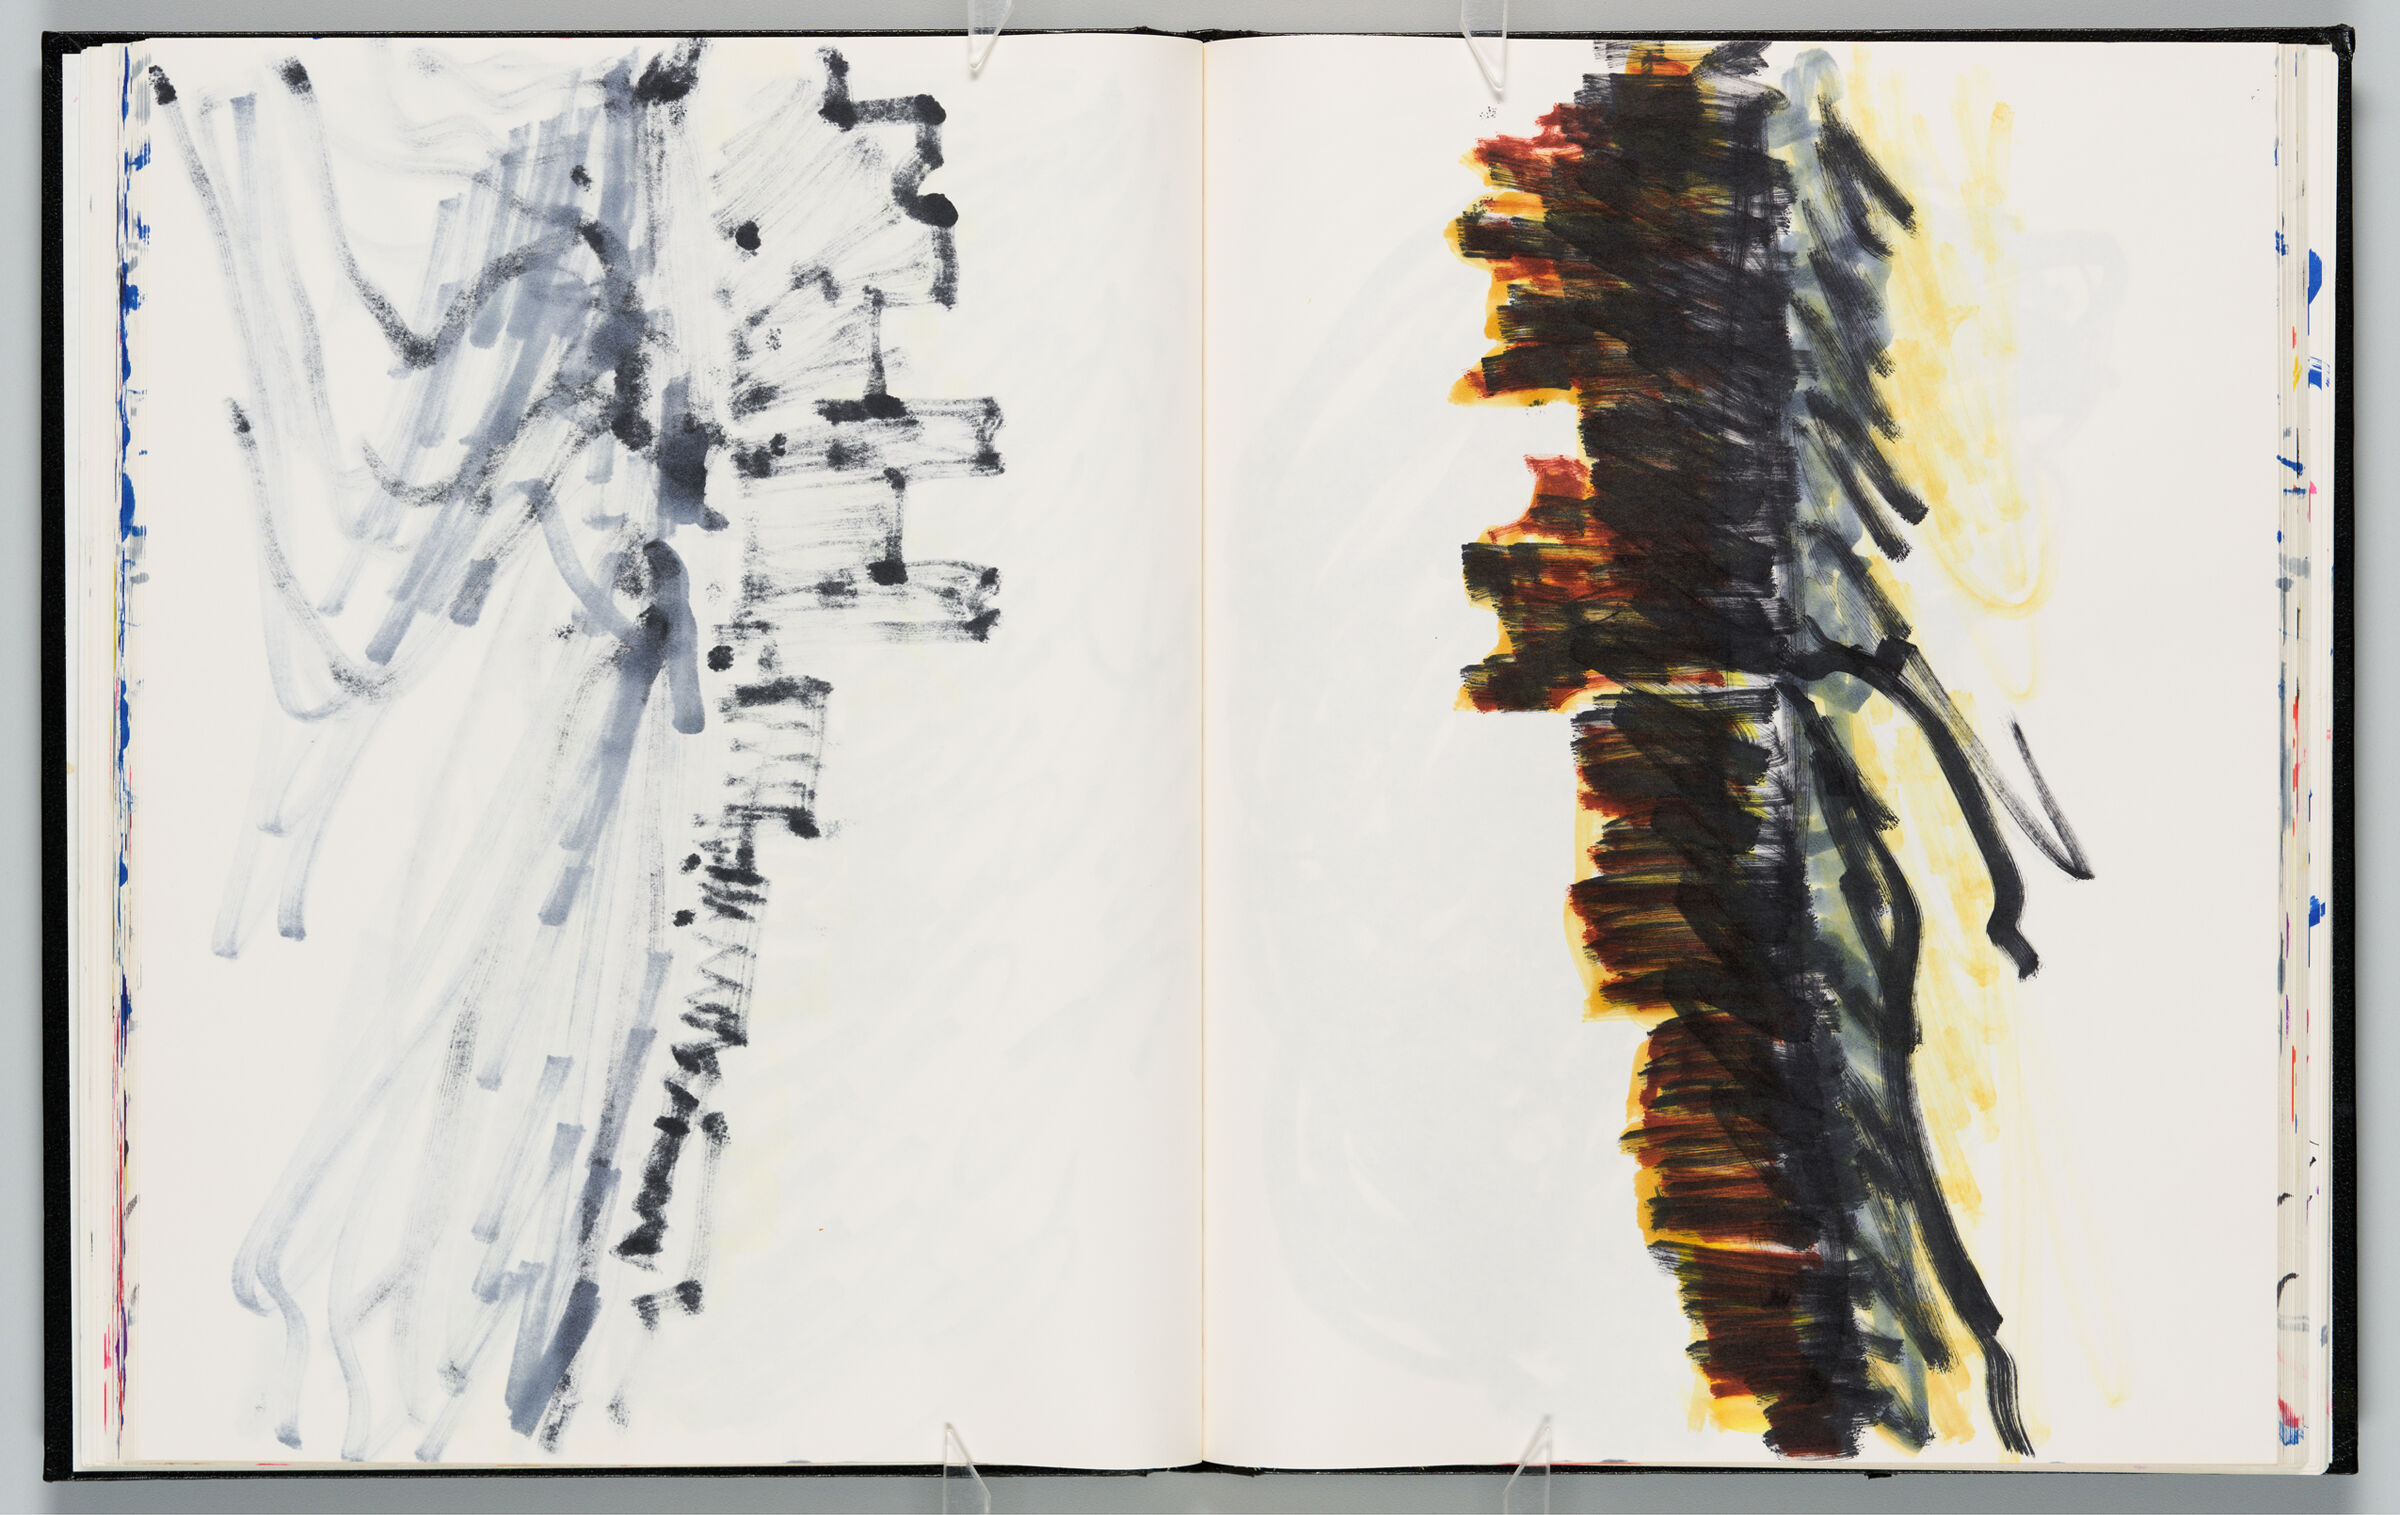 Untitled (Bleed-Through Of Previous Page, Left Page); Untitled (View Of M'hamid Village, Right Page)